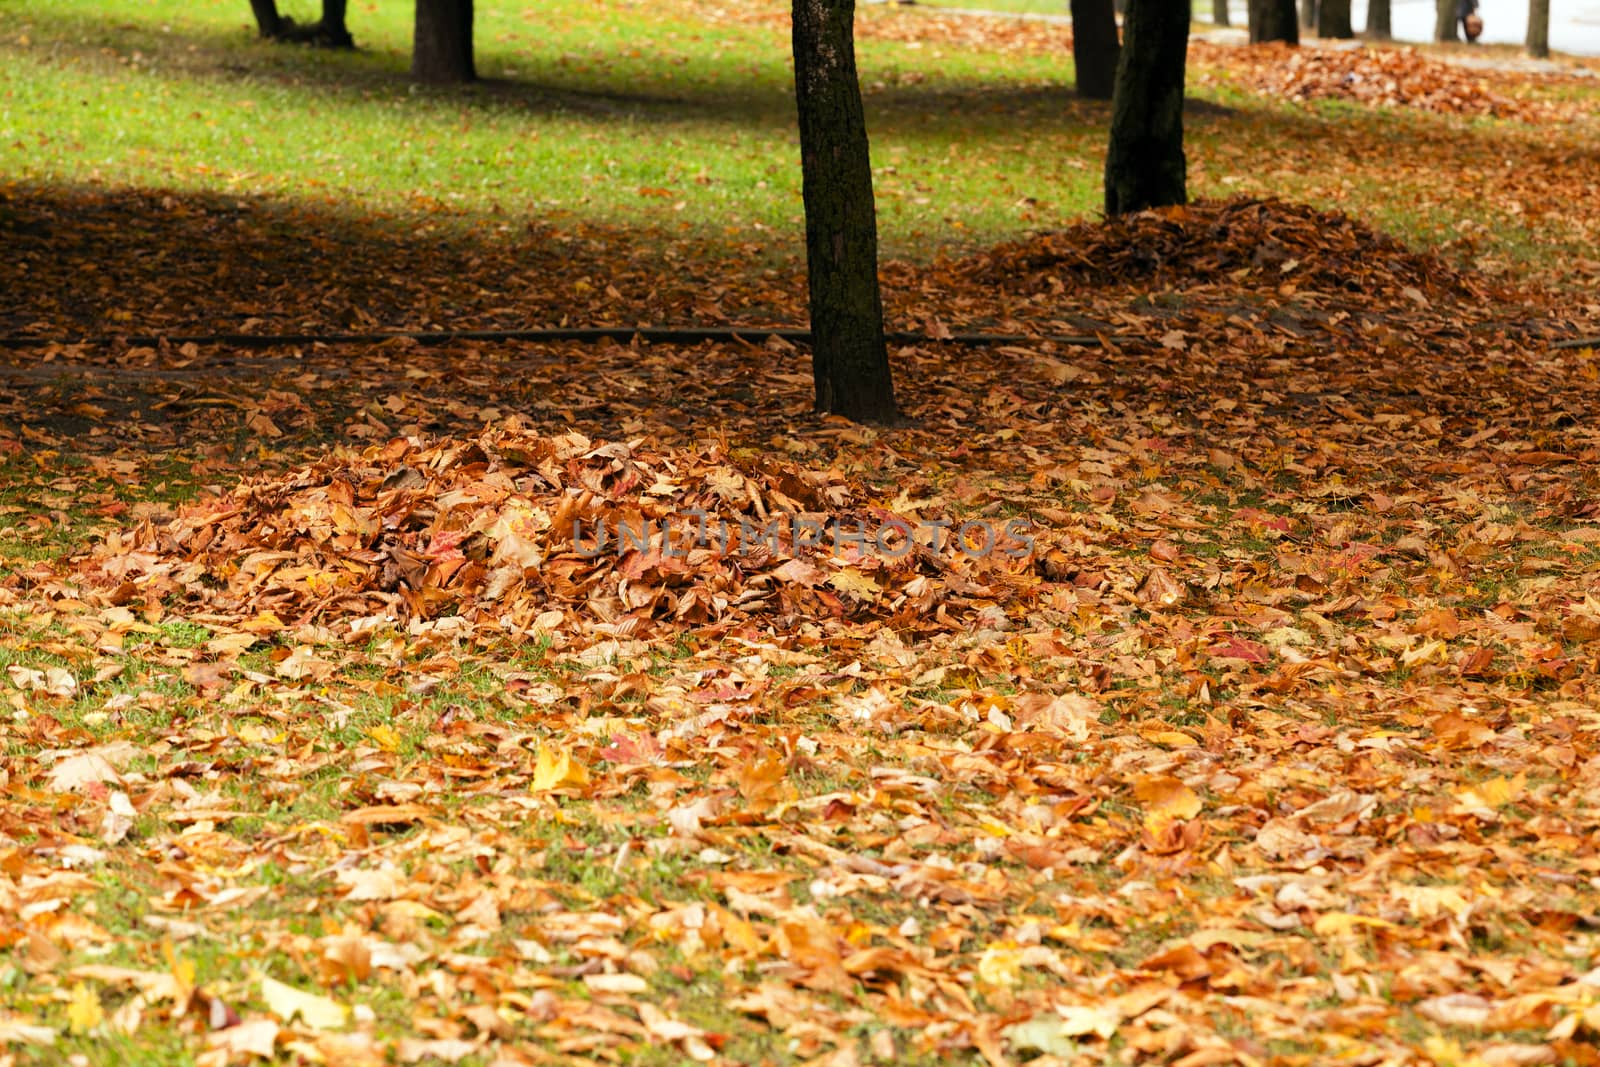   leaves on the trees fell on the ground, huddled together. Autumn. City Park.